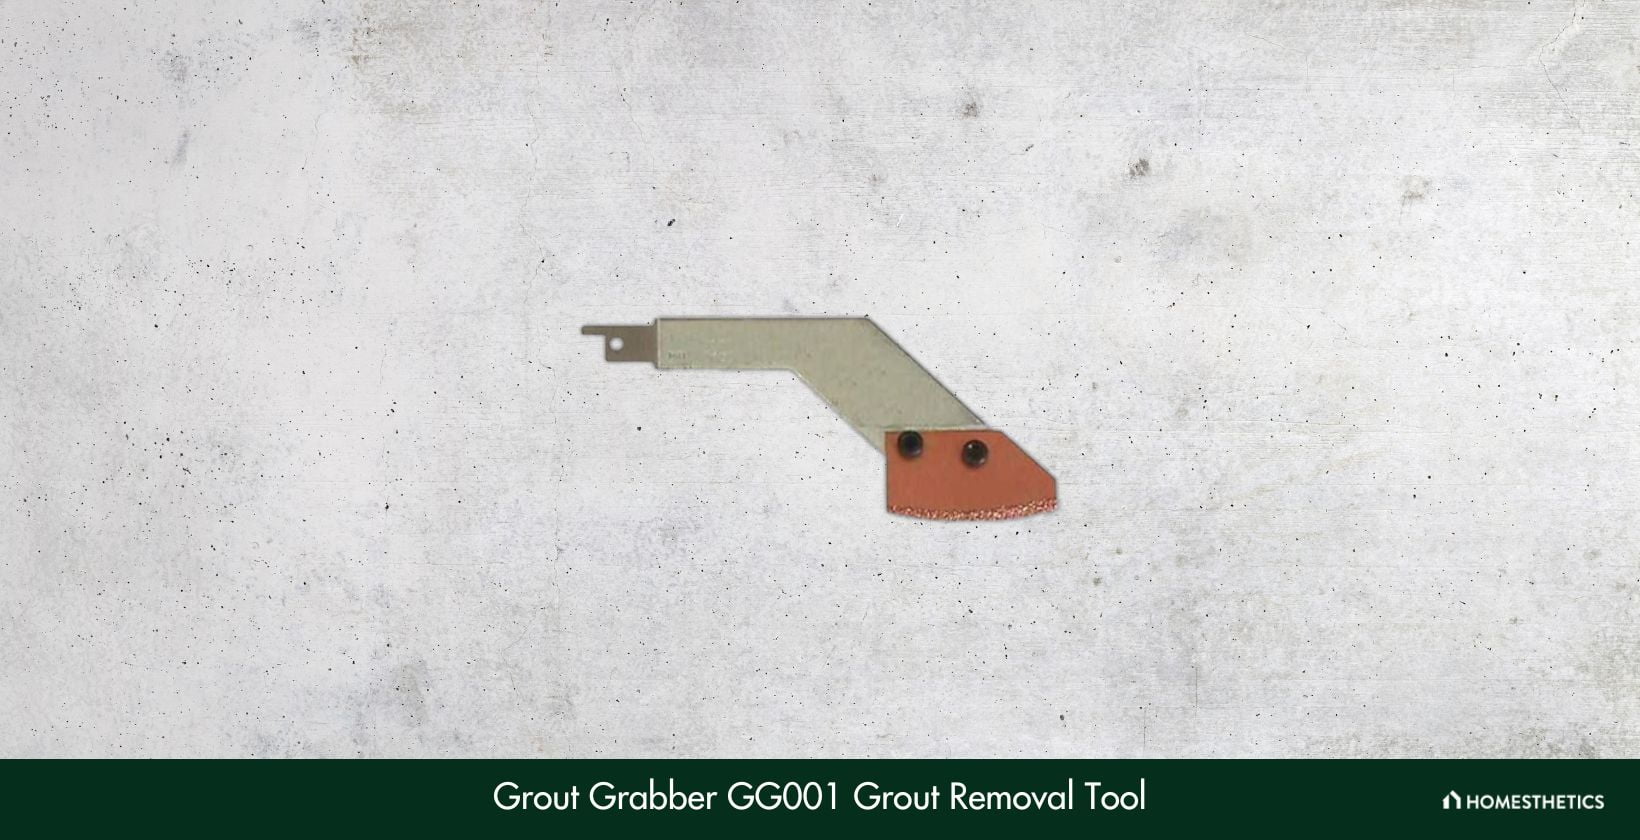 Grout Grabber GG001 Grout Removal Tool